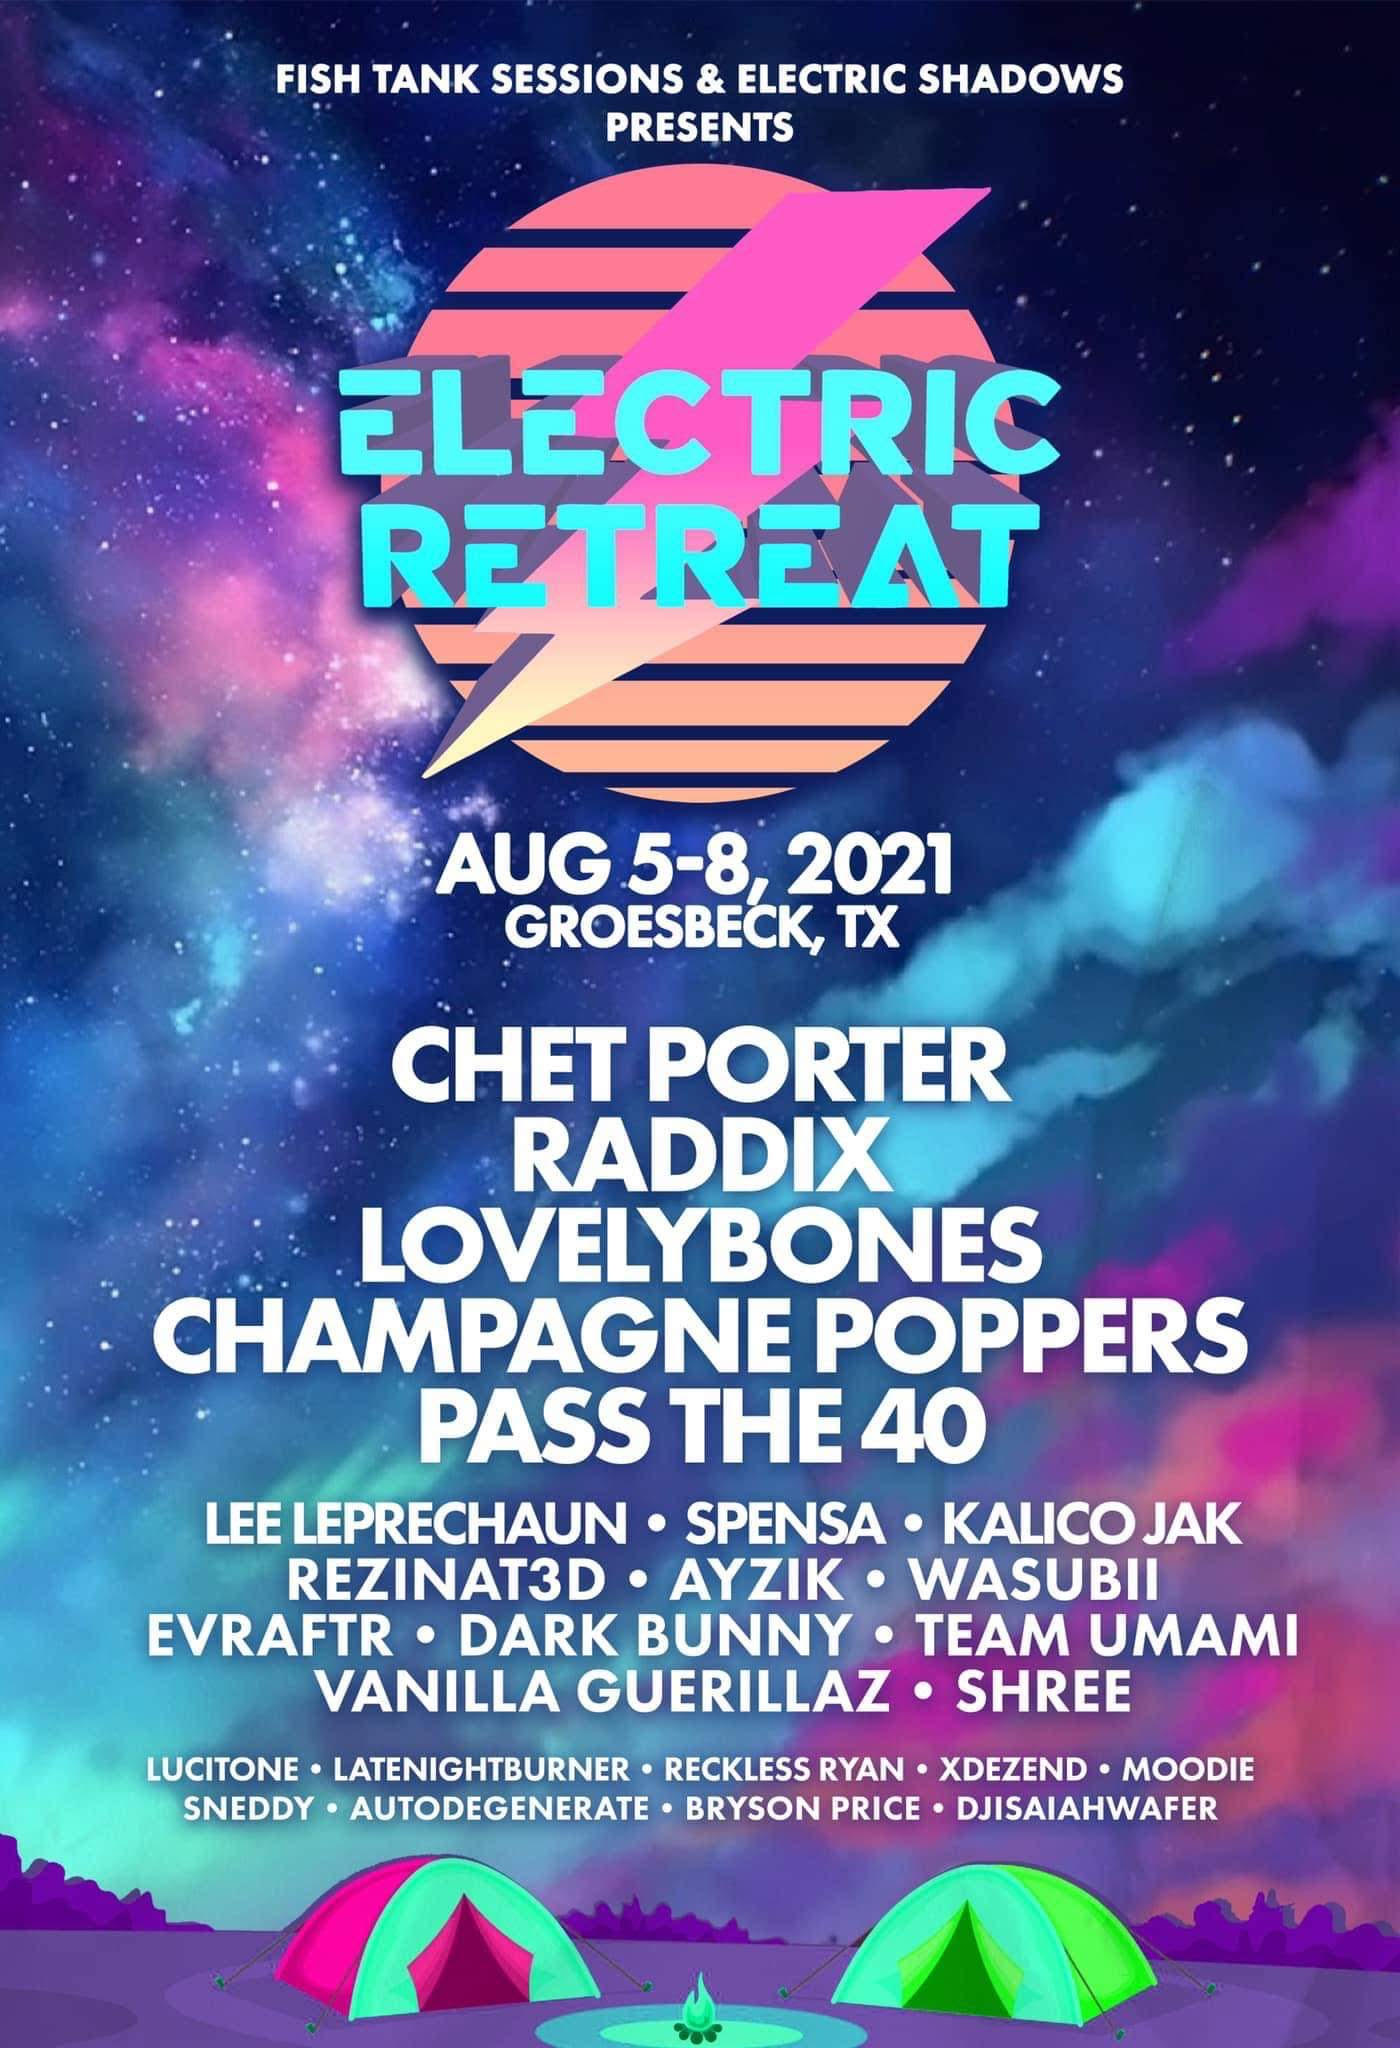 Electric Retreat Discount Tickets, Promo Code, GA Passes, VIP, Camp, Weekend, All Access, Coupon, Festival, Concert, Outdoors, DJ, Band